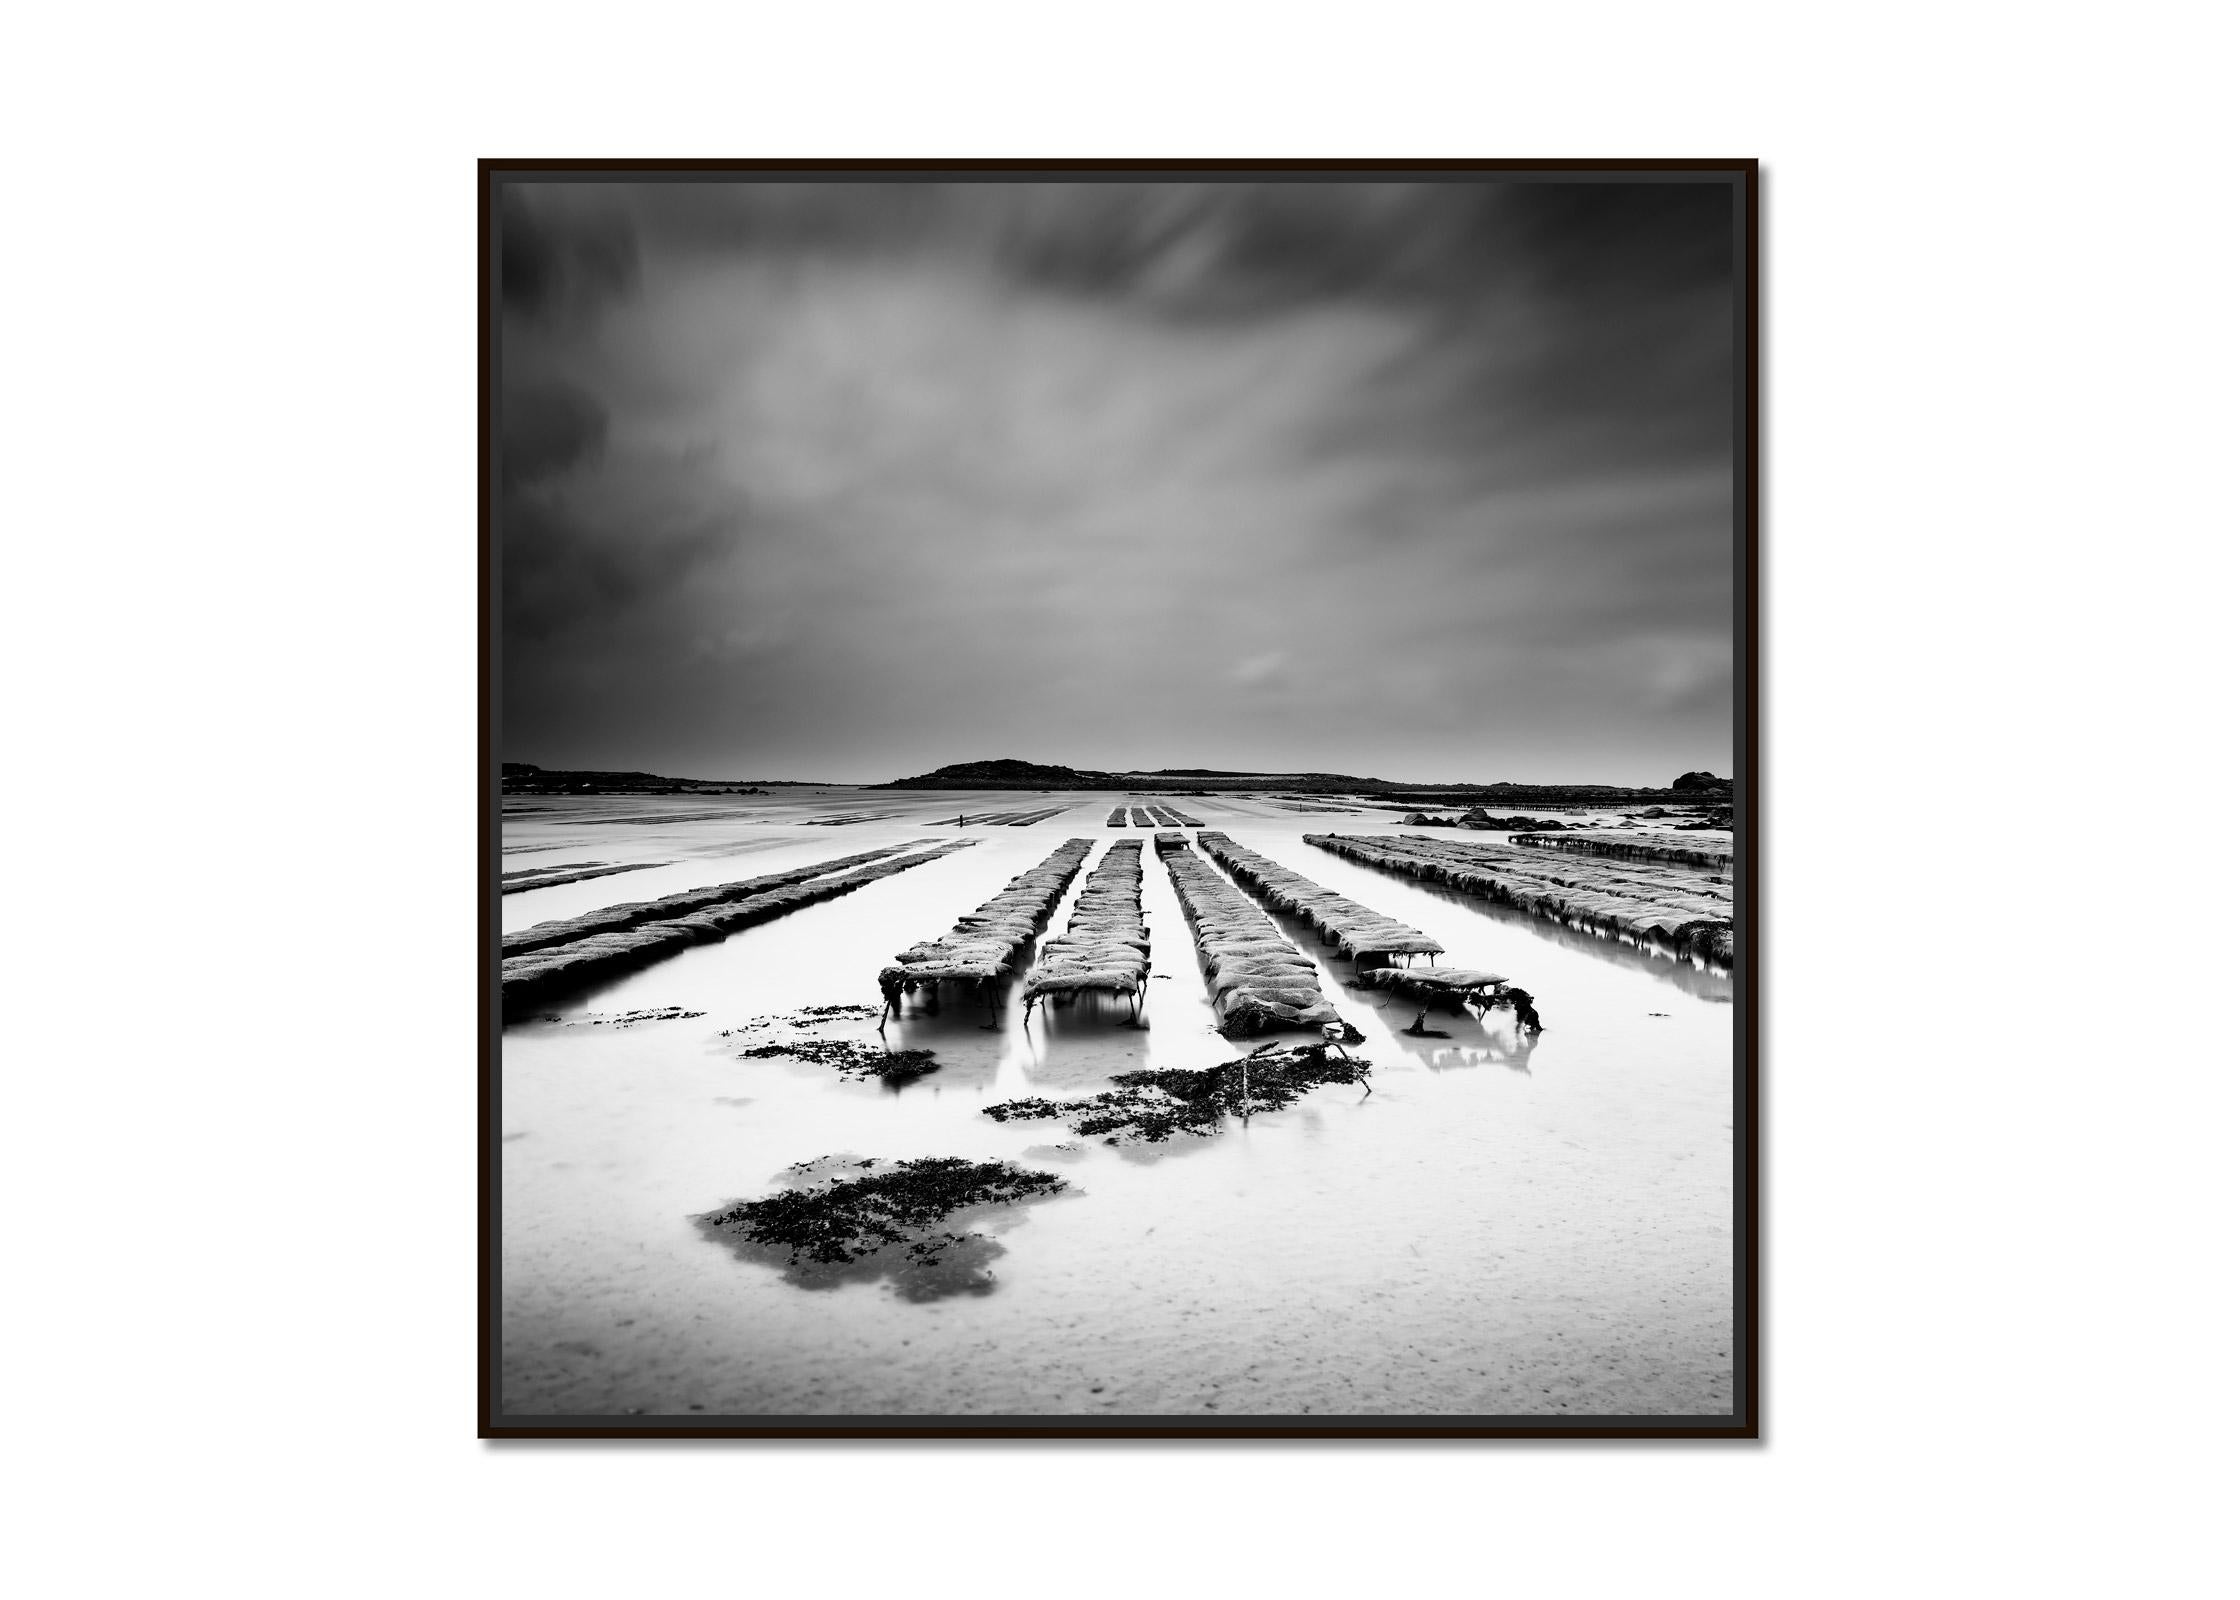 Oyster Farm, Atlantic Coast, France, black and white photography, art seascape - Photograph by Gerald Berghammer